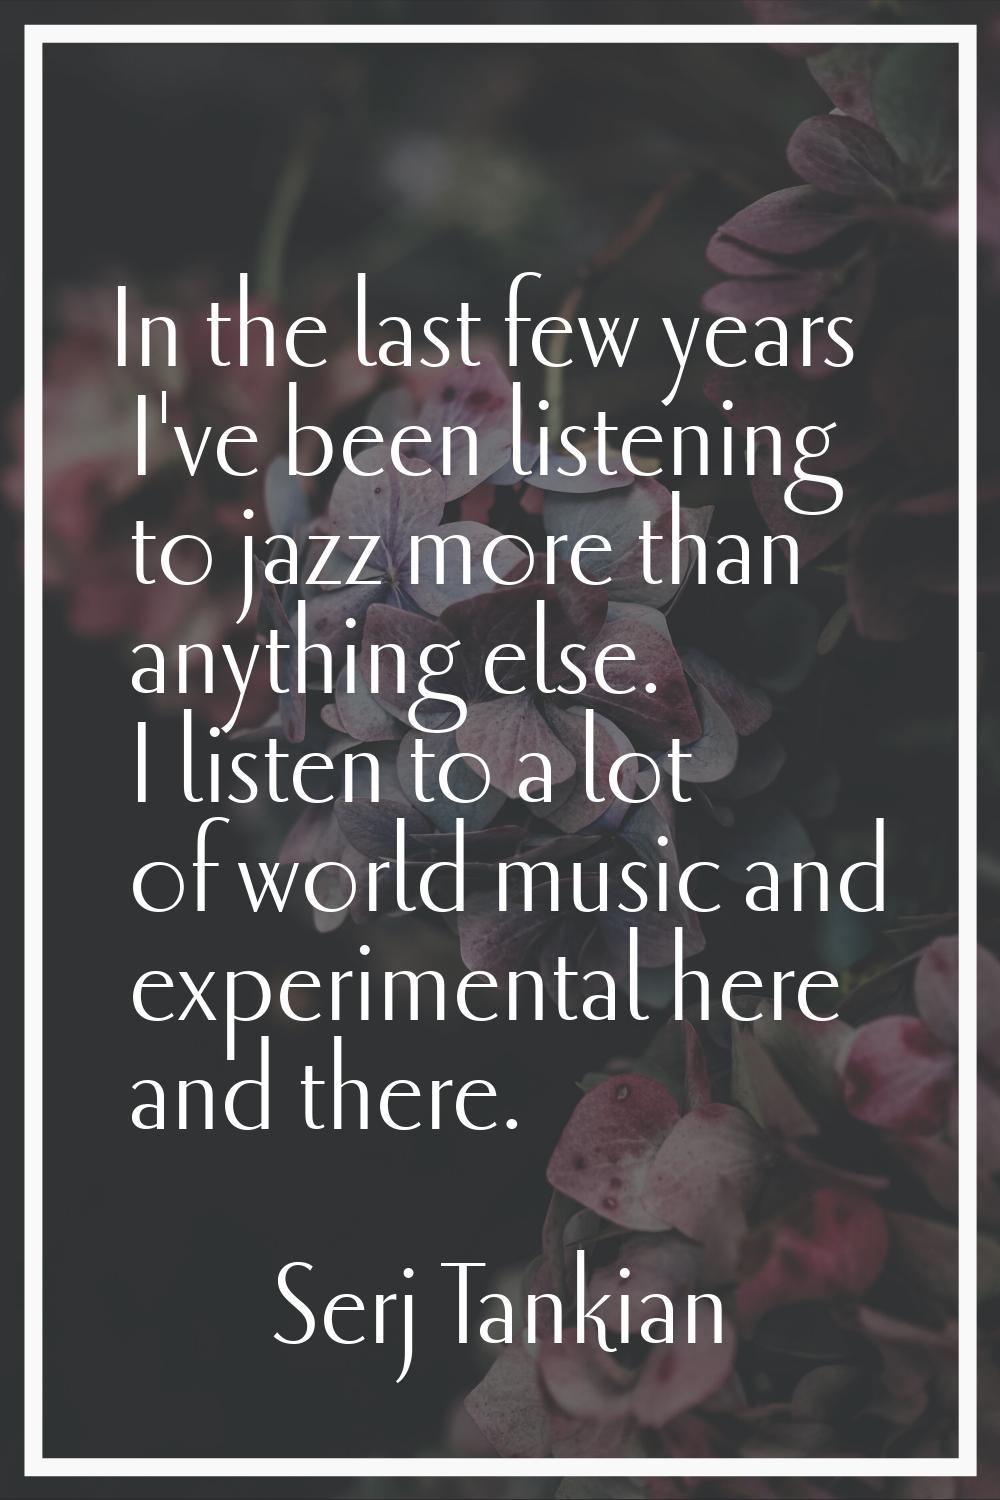 In the last few years I've been listening to jazz more than anything else. I listen to a lot of wor